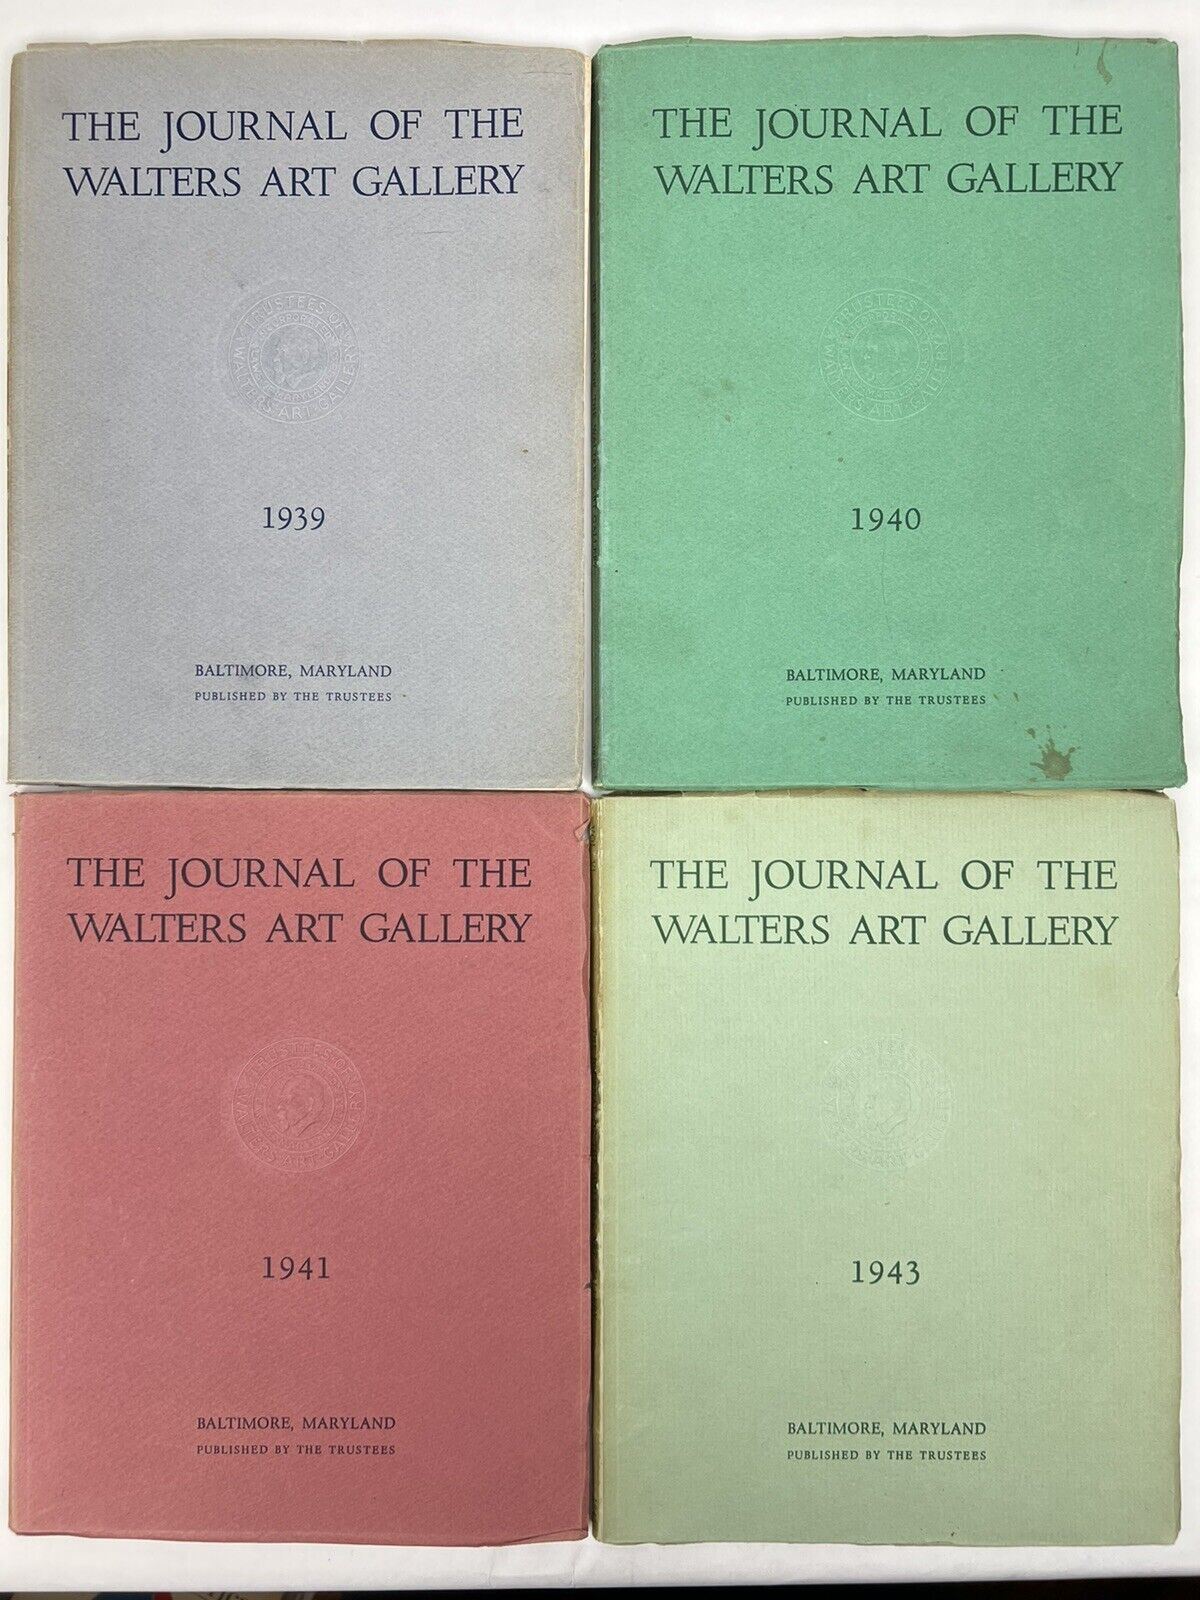 12 Vols JOURNAL OF THE WALTERS ART GALLERY 1939-1955 VINTAGE CATALOGUE BULLETIN